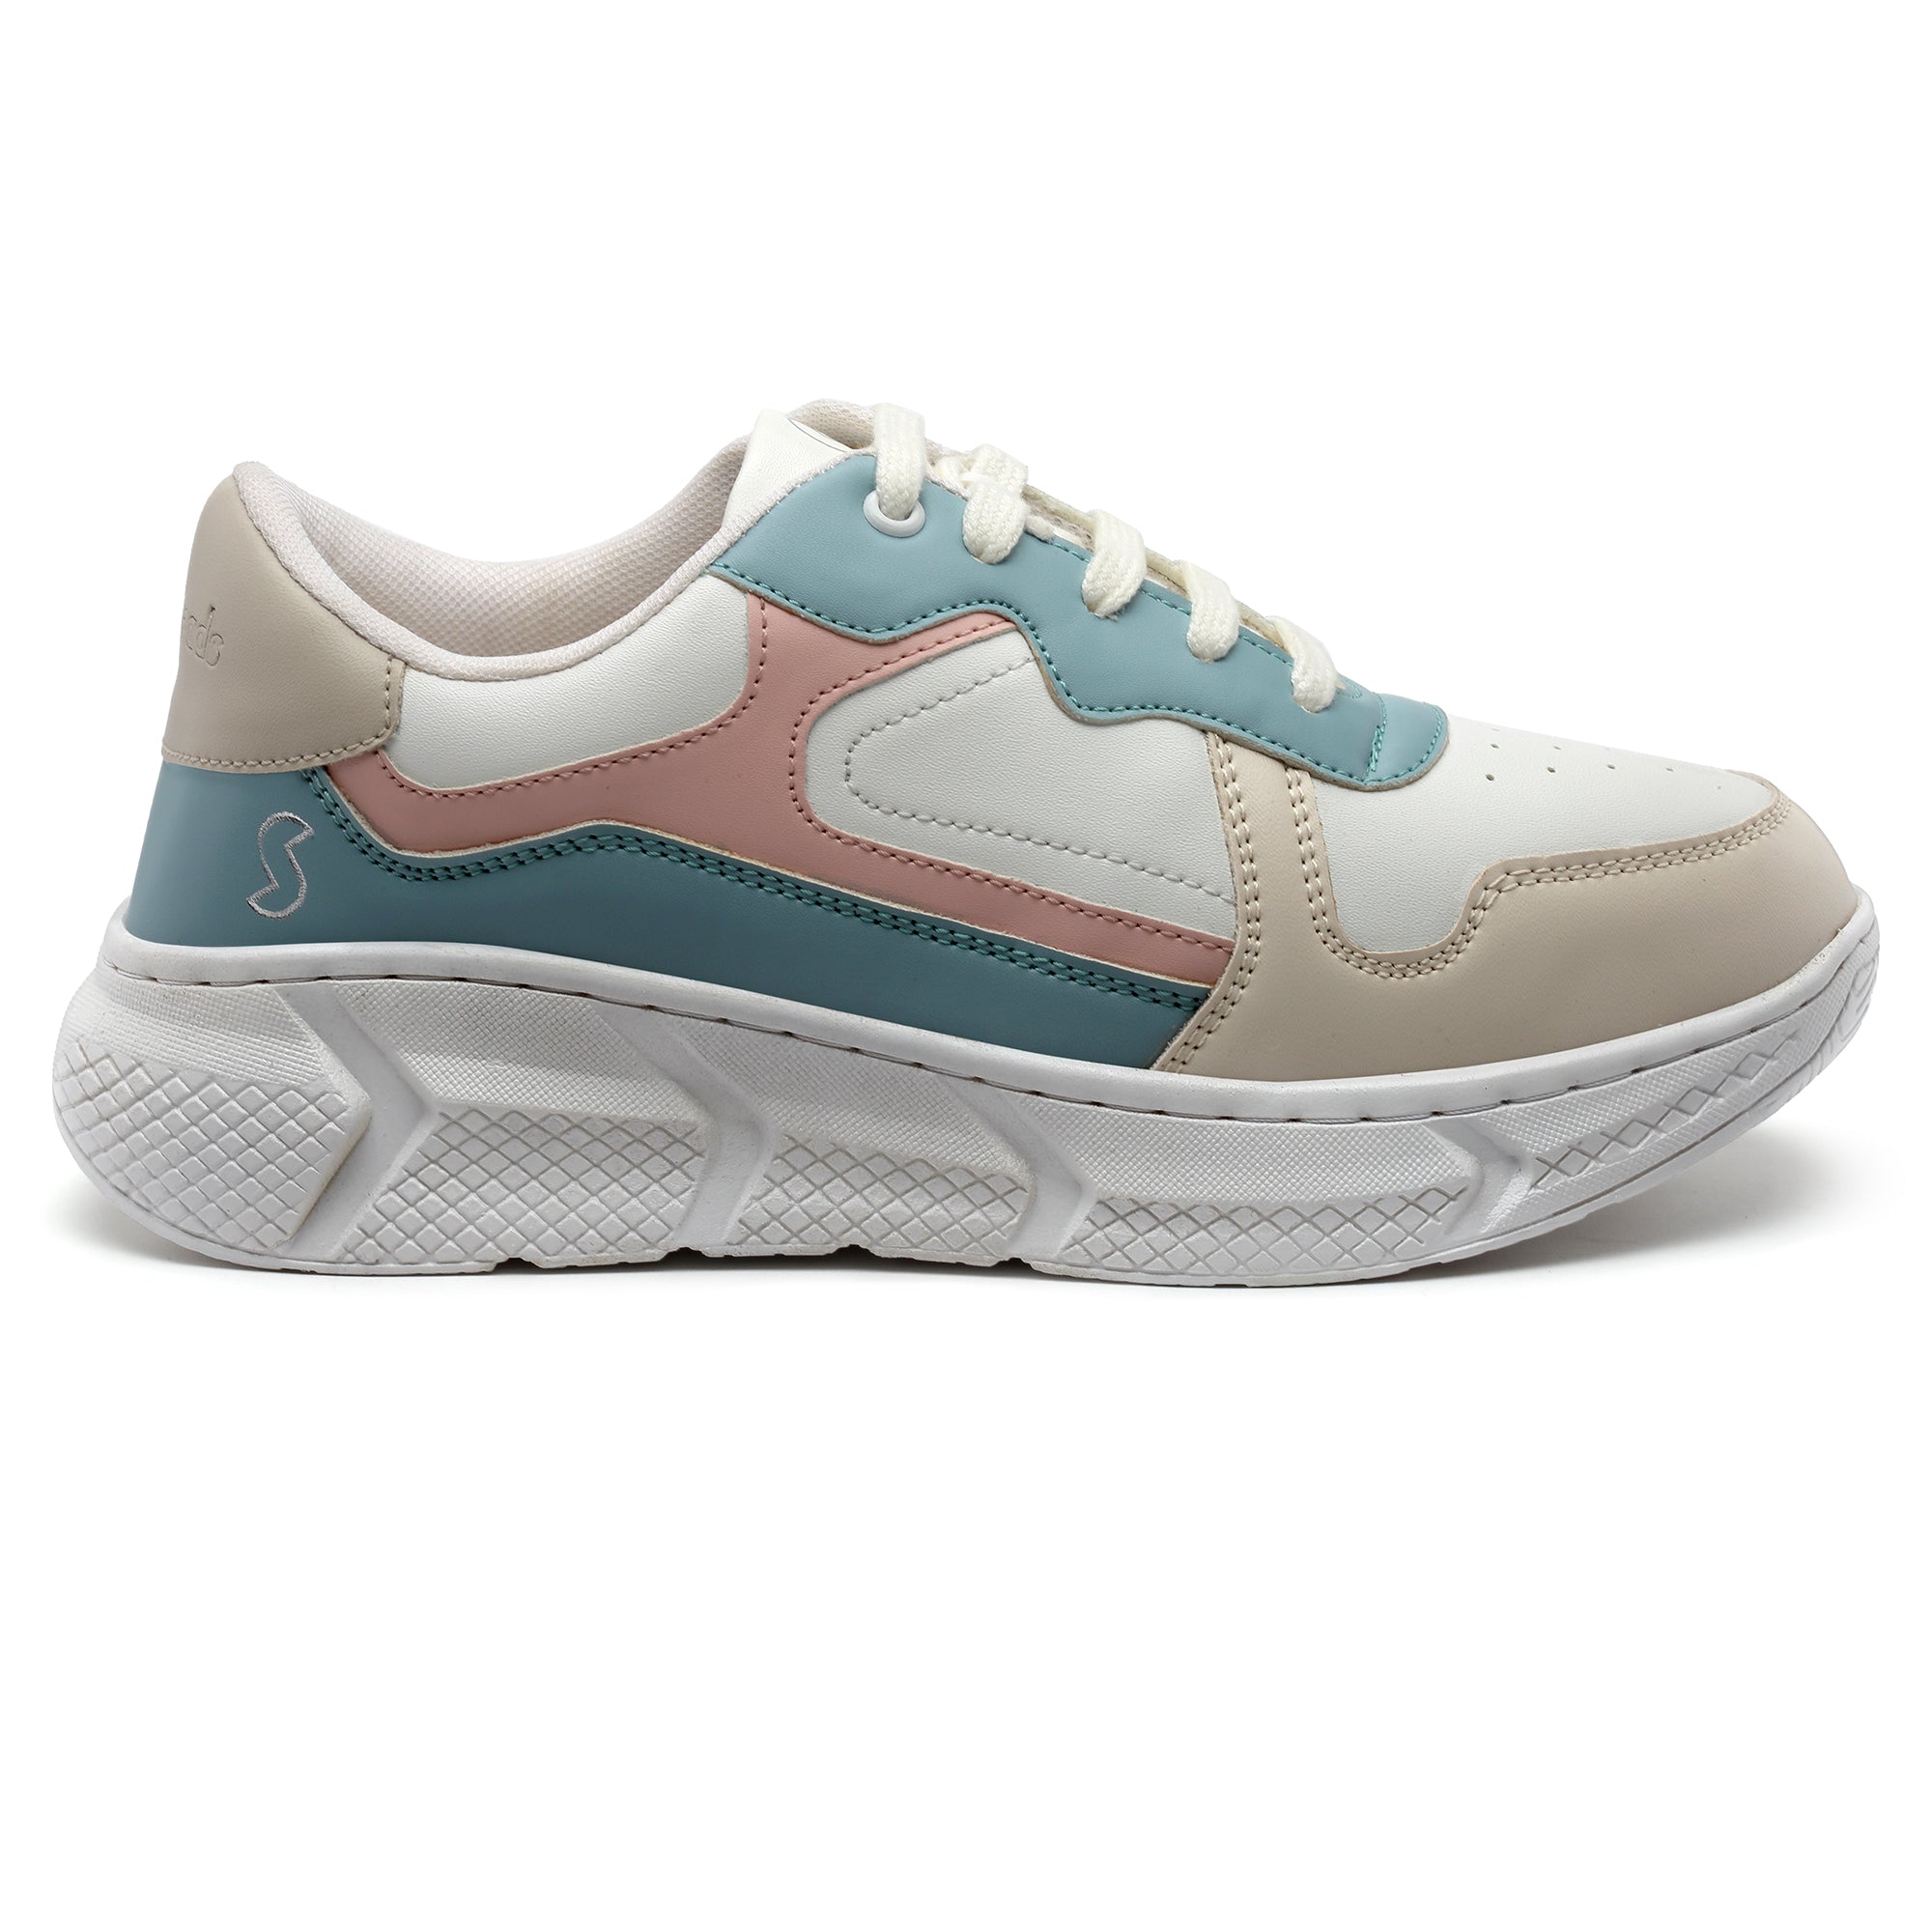 Cliff Sneakers For Women - Solethreads